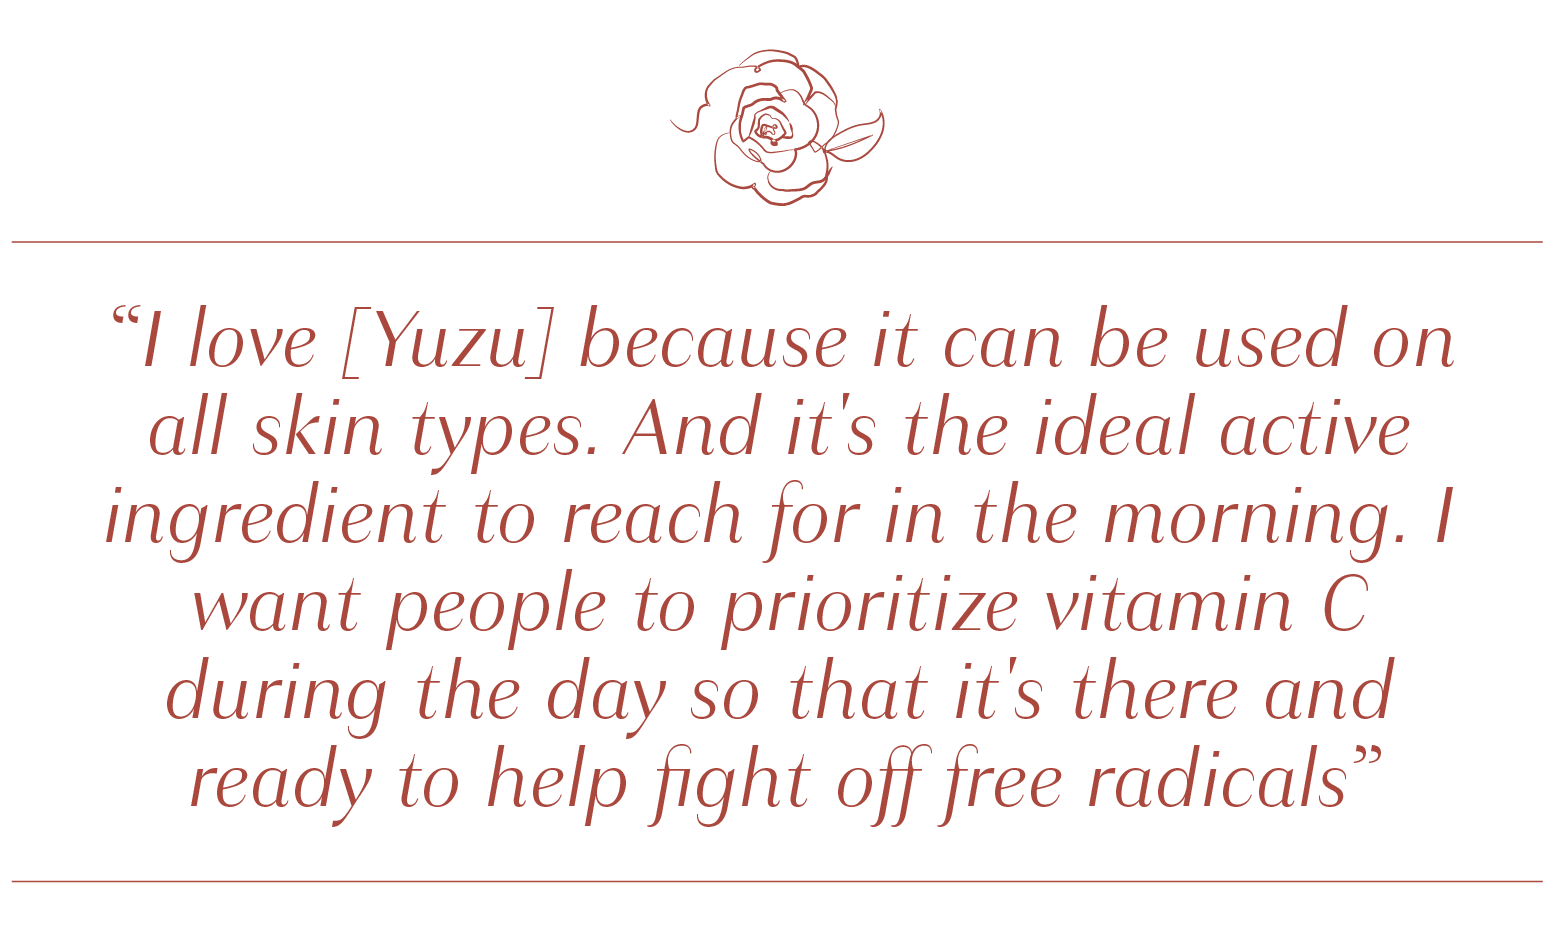 I love [Yuzu] because it can be used on all skin types. And it's the ideal active ingredient to reach for in the morning.
            I want people to prioritize vitamin C during the day so that it's there and ready to help fight off free radicals.